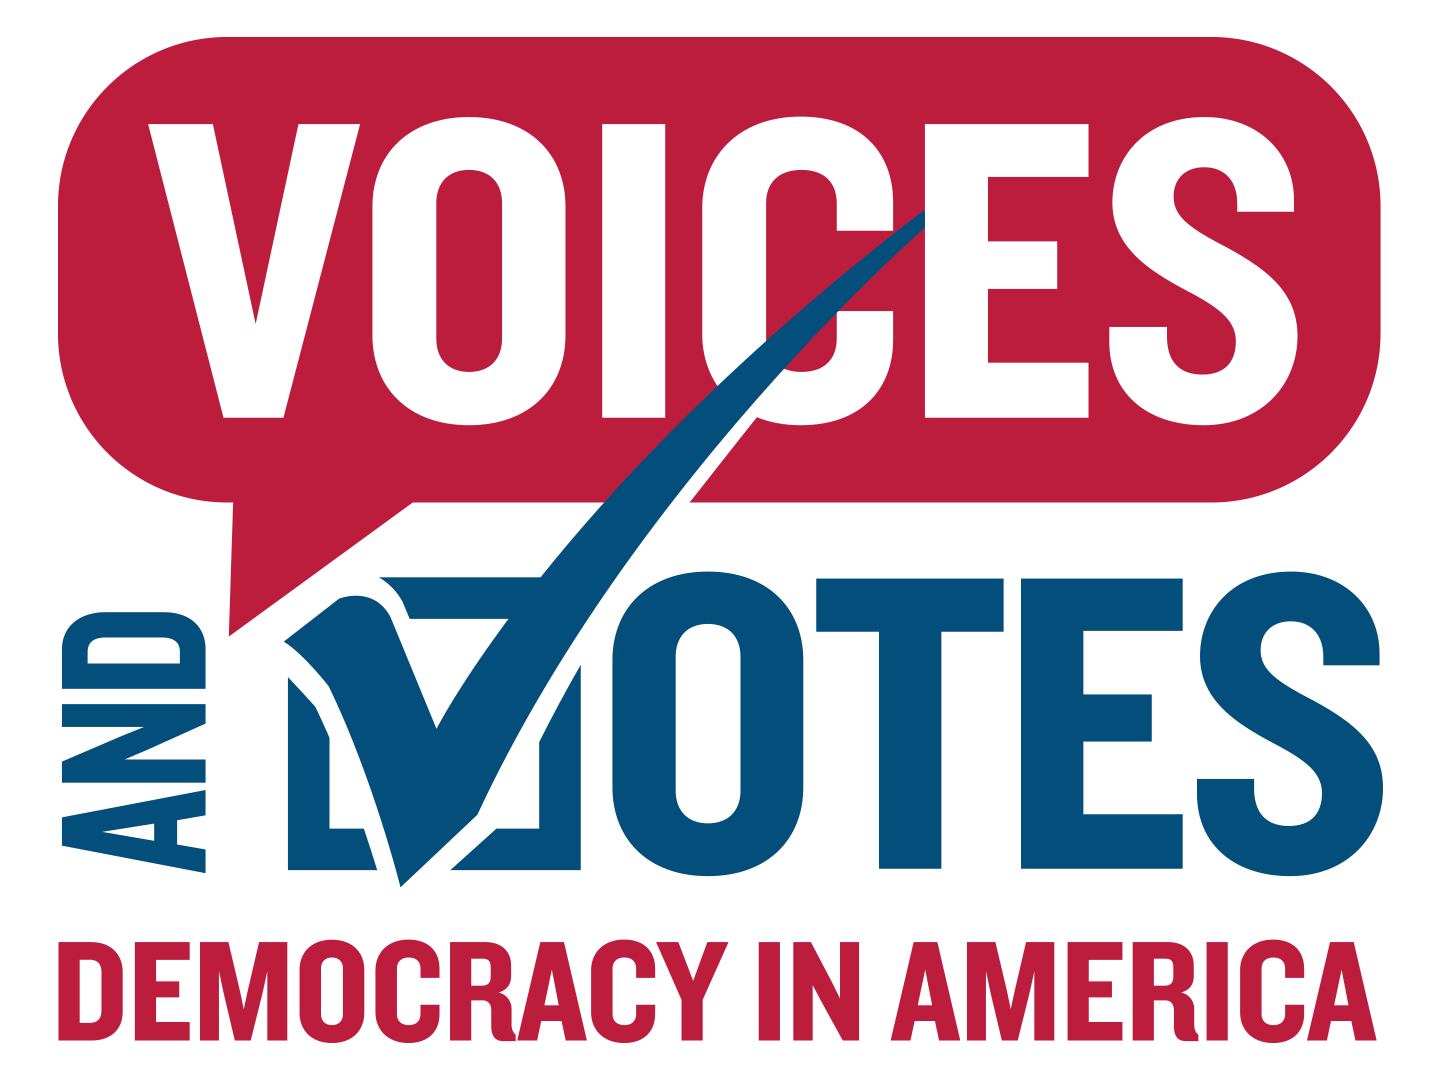 "Voices and Votes: Democracy in America" logo color